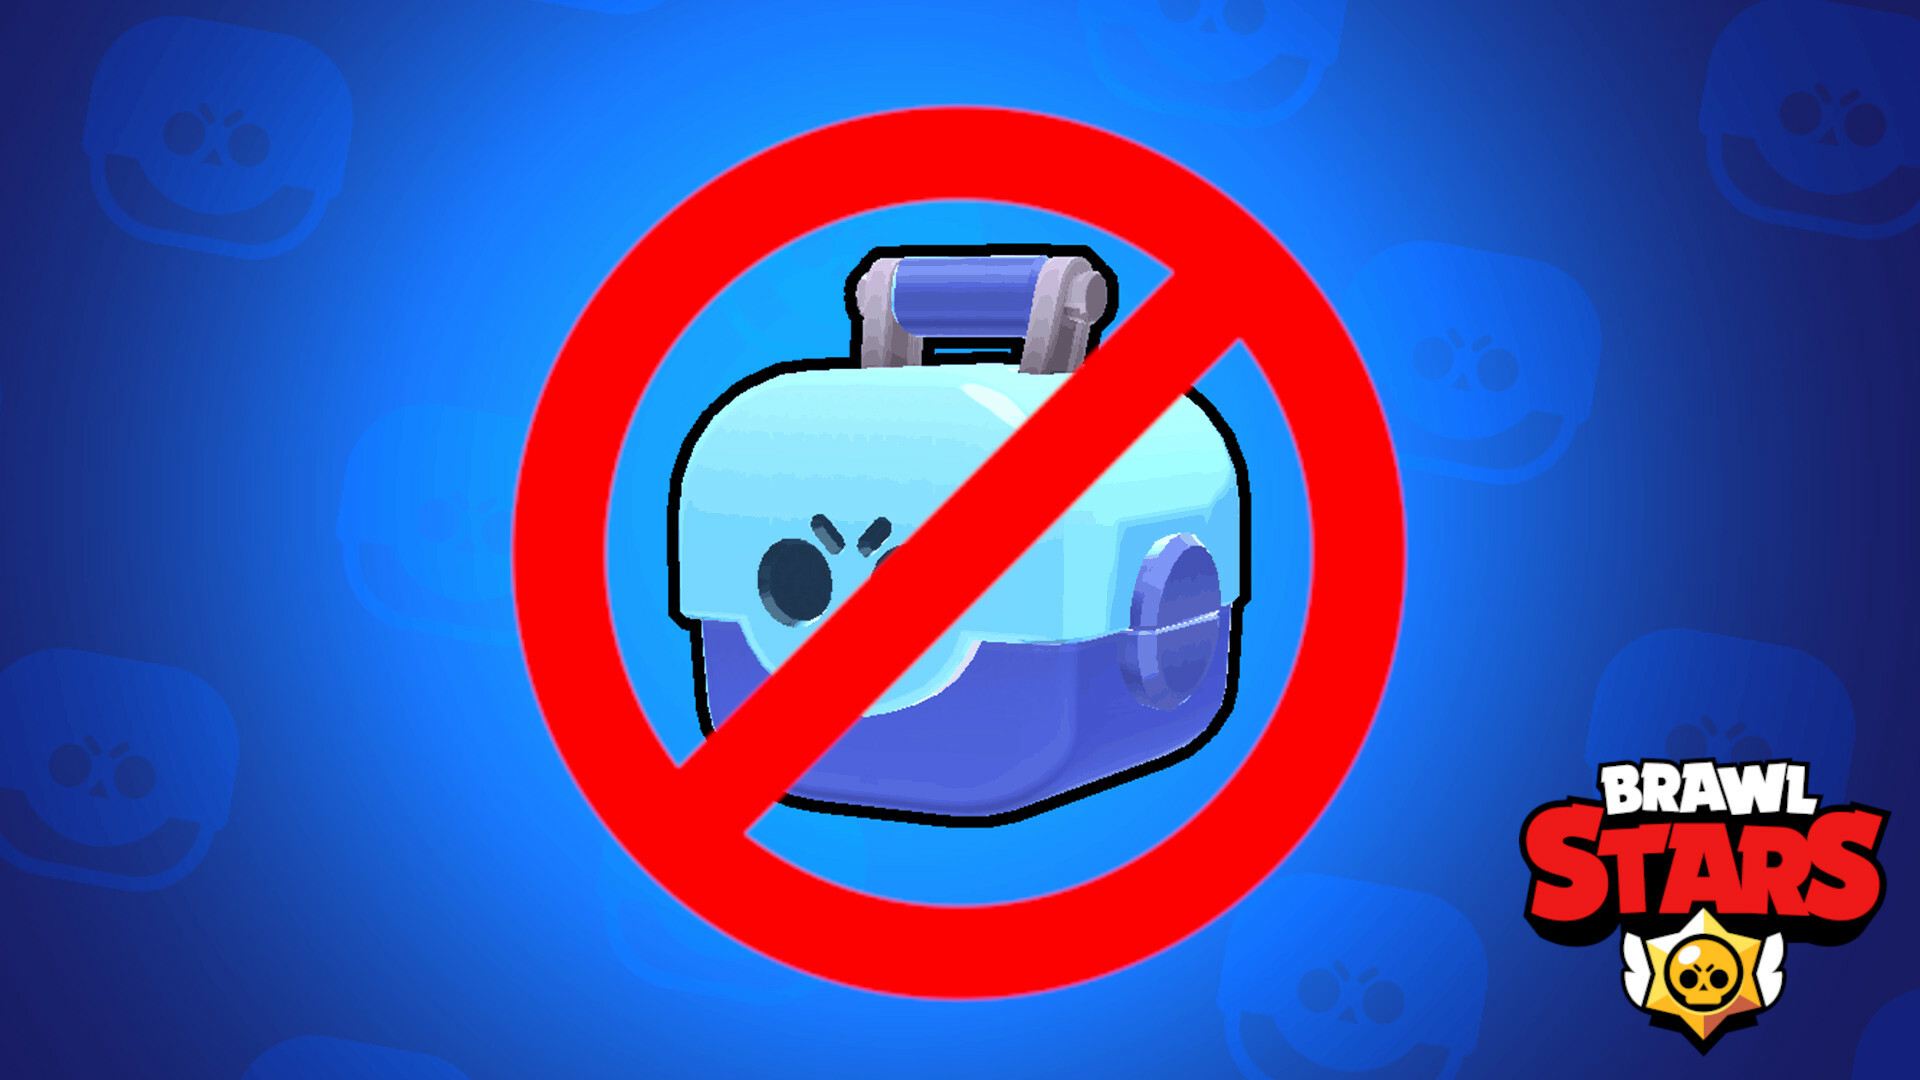 Boxes Will Be Removed From Brawl Stars | MobileMatters